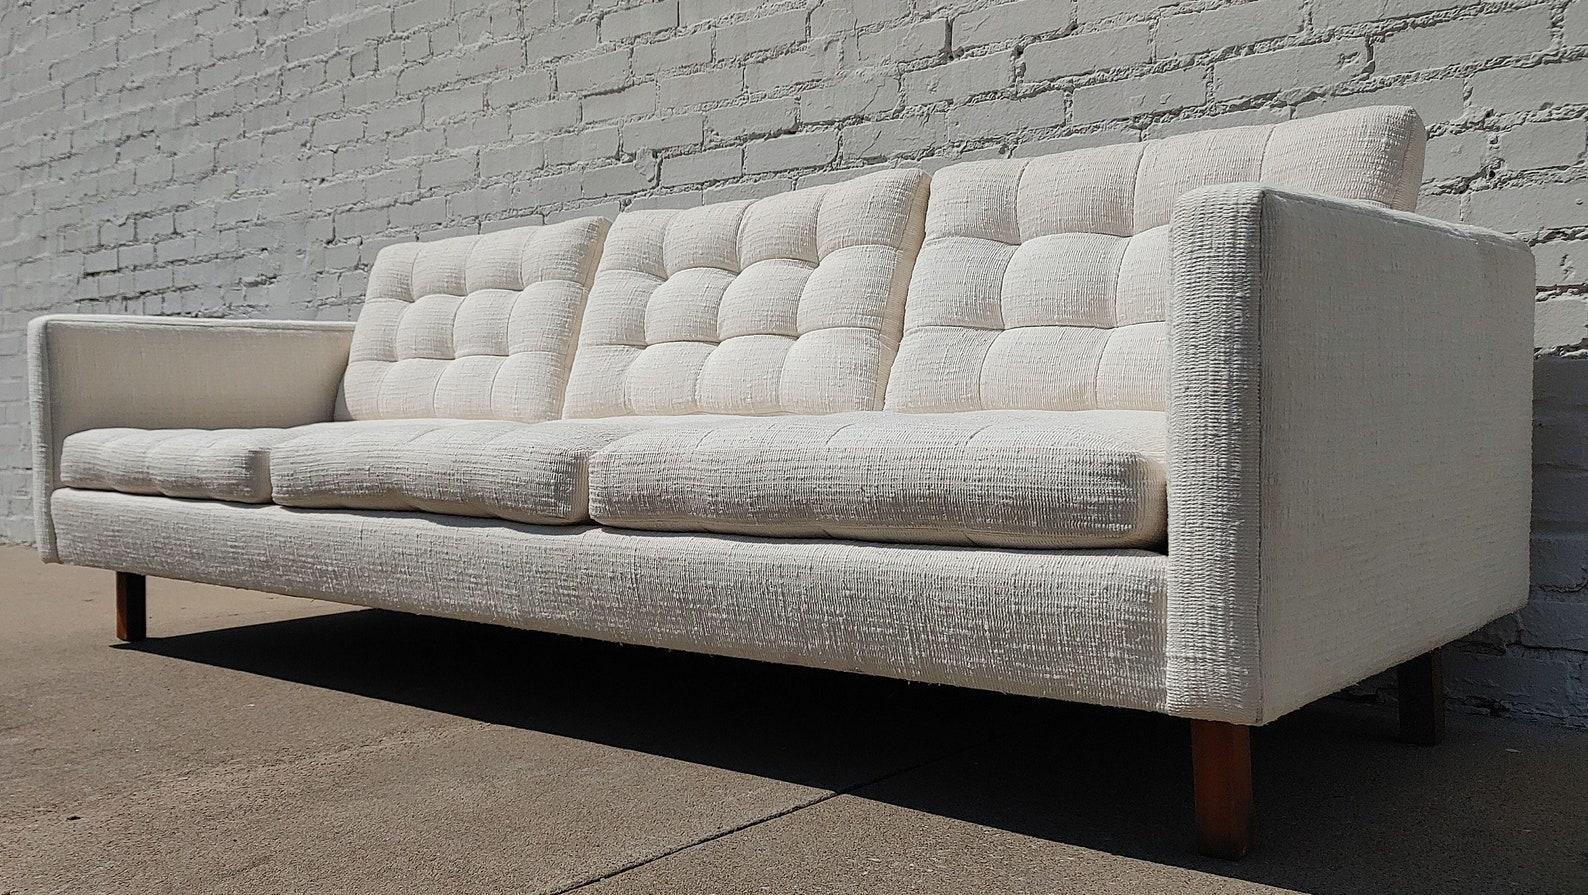 Mid Century Danish Modern Tufted Sofa

Above average vintage condition and structurally sound. Upholstery is very clean, not perfect but looks close to brand new. Outdoor listing pictures might appear slightly darker or more red than the item does